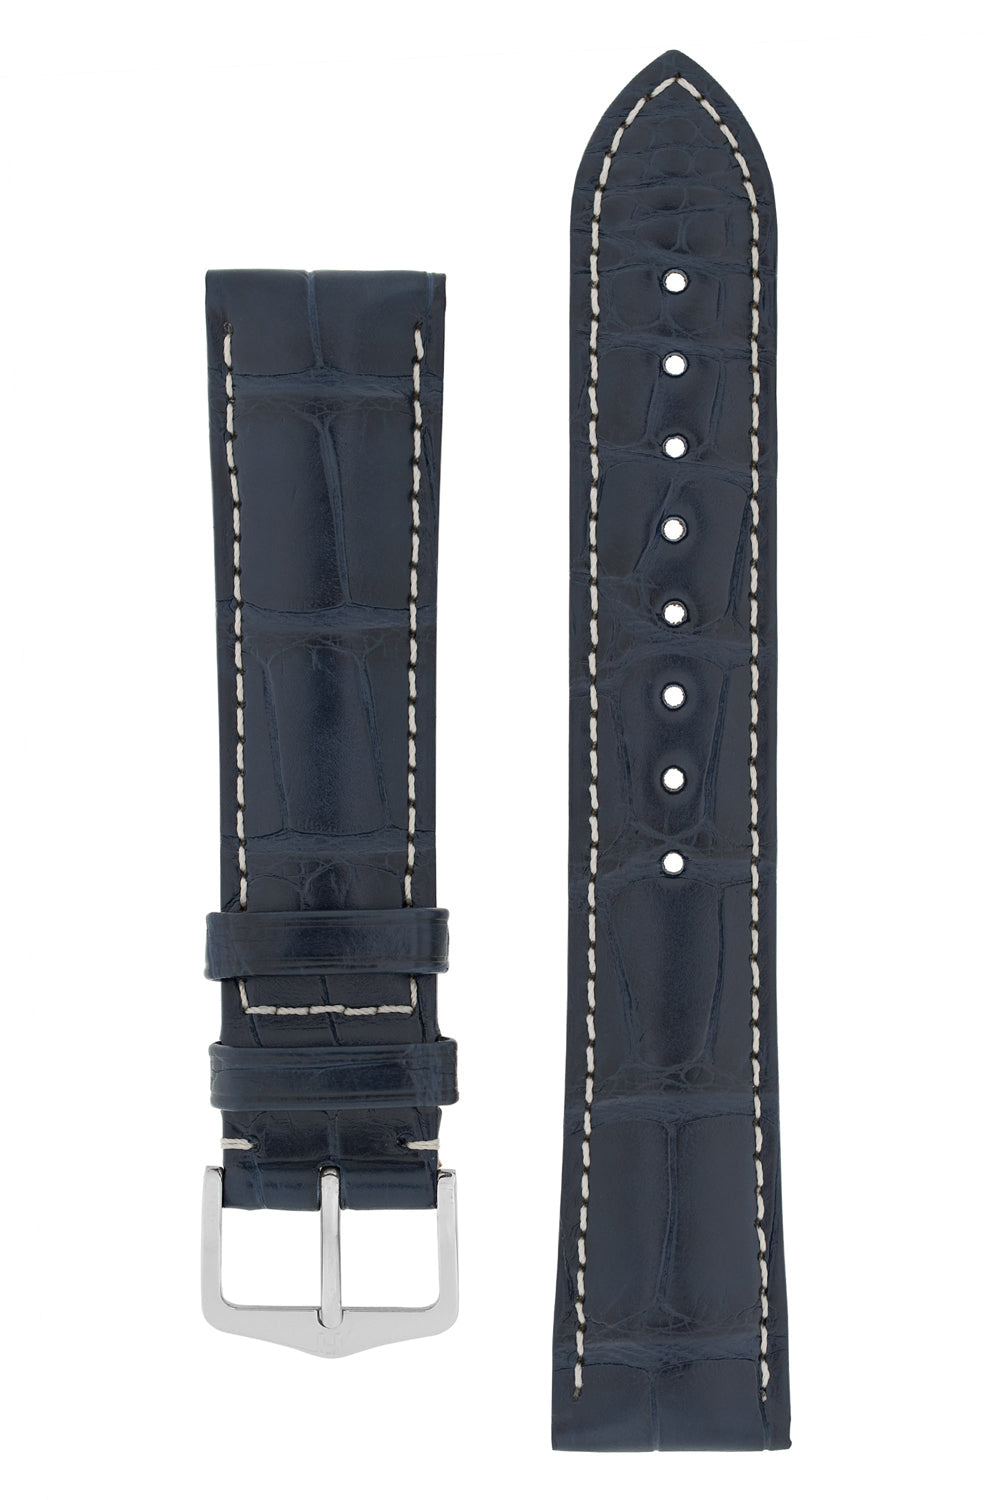 Hirsch Connoisseur Genuine Alligator Watch Strap in Blue (with Polished Silver Steel H-Tradition Buckle)